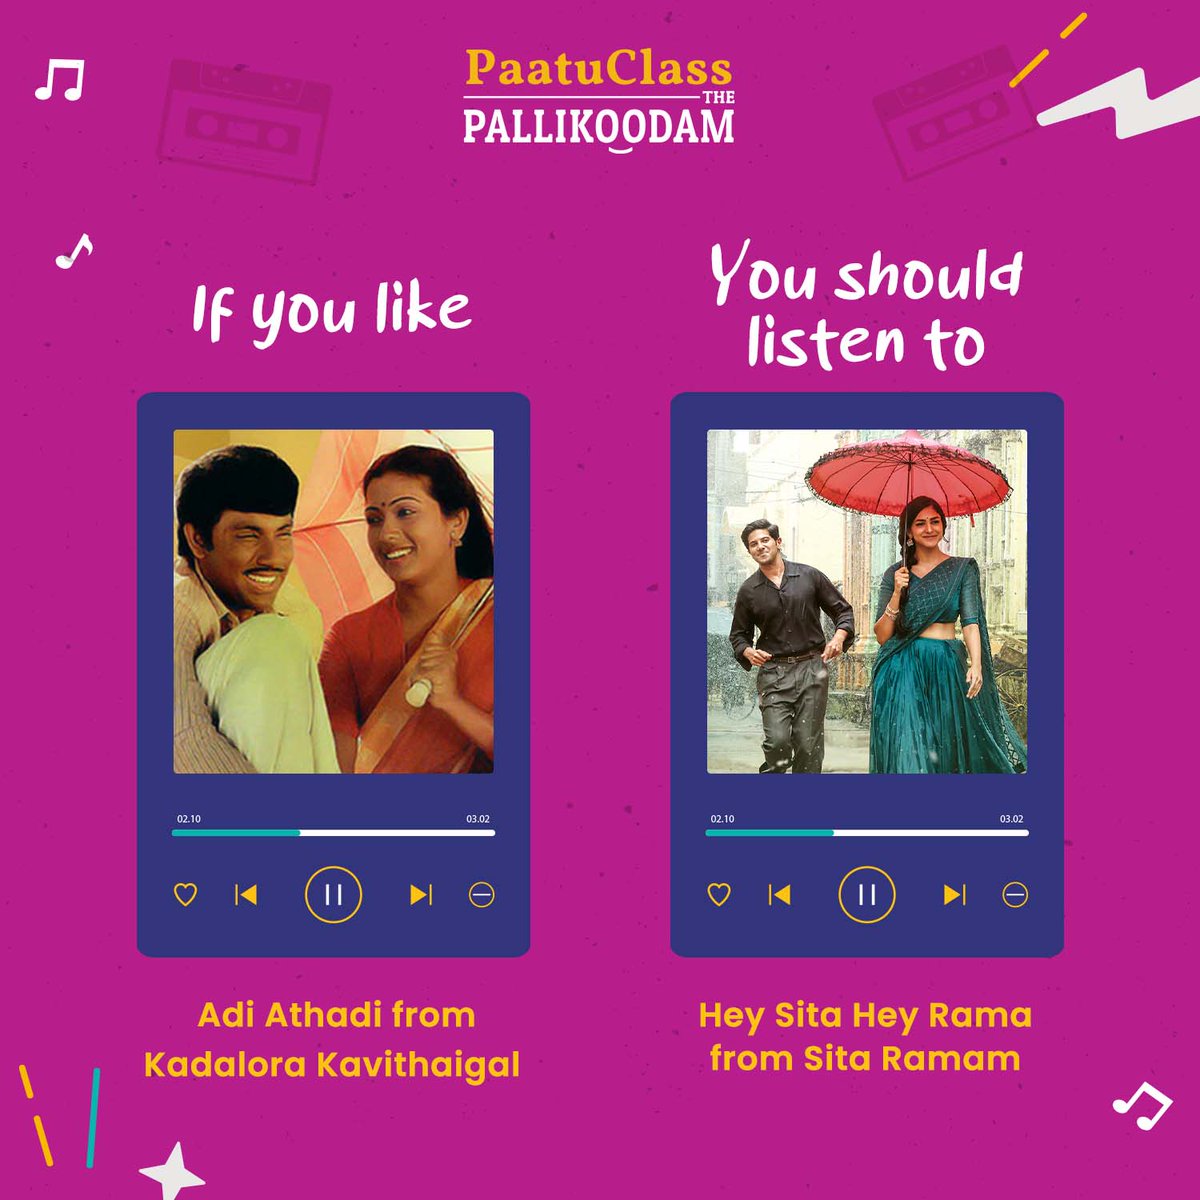 Tell us if our suggestions hit the mark, or share your own recommendations in the comments below!

#ThePallikoodam #PaatuClass #VocalTraining #VocalTechnique #Music #OnlineMusicLessons #VoiceLessons #Singing #OnlineLessons #MusicTeachers #Voice #VoiceTraining